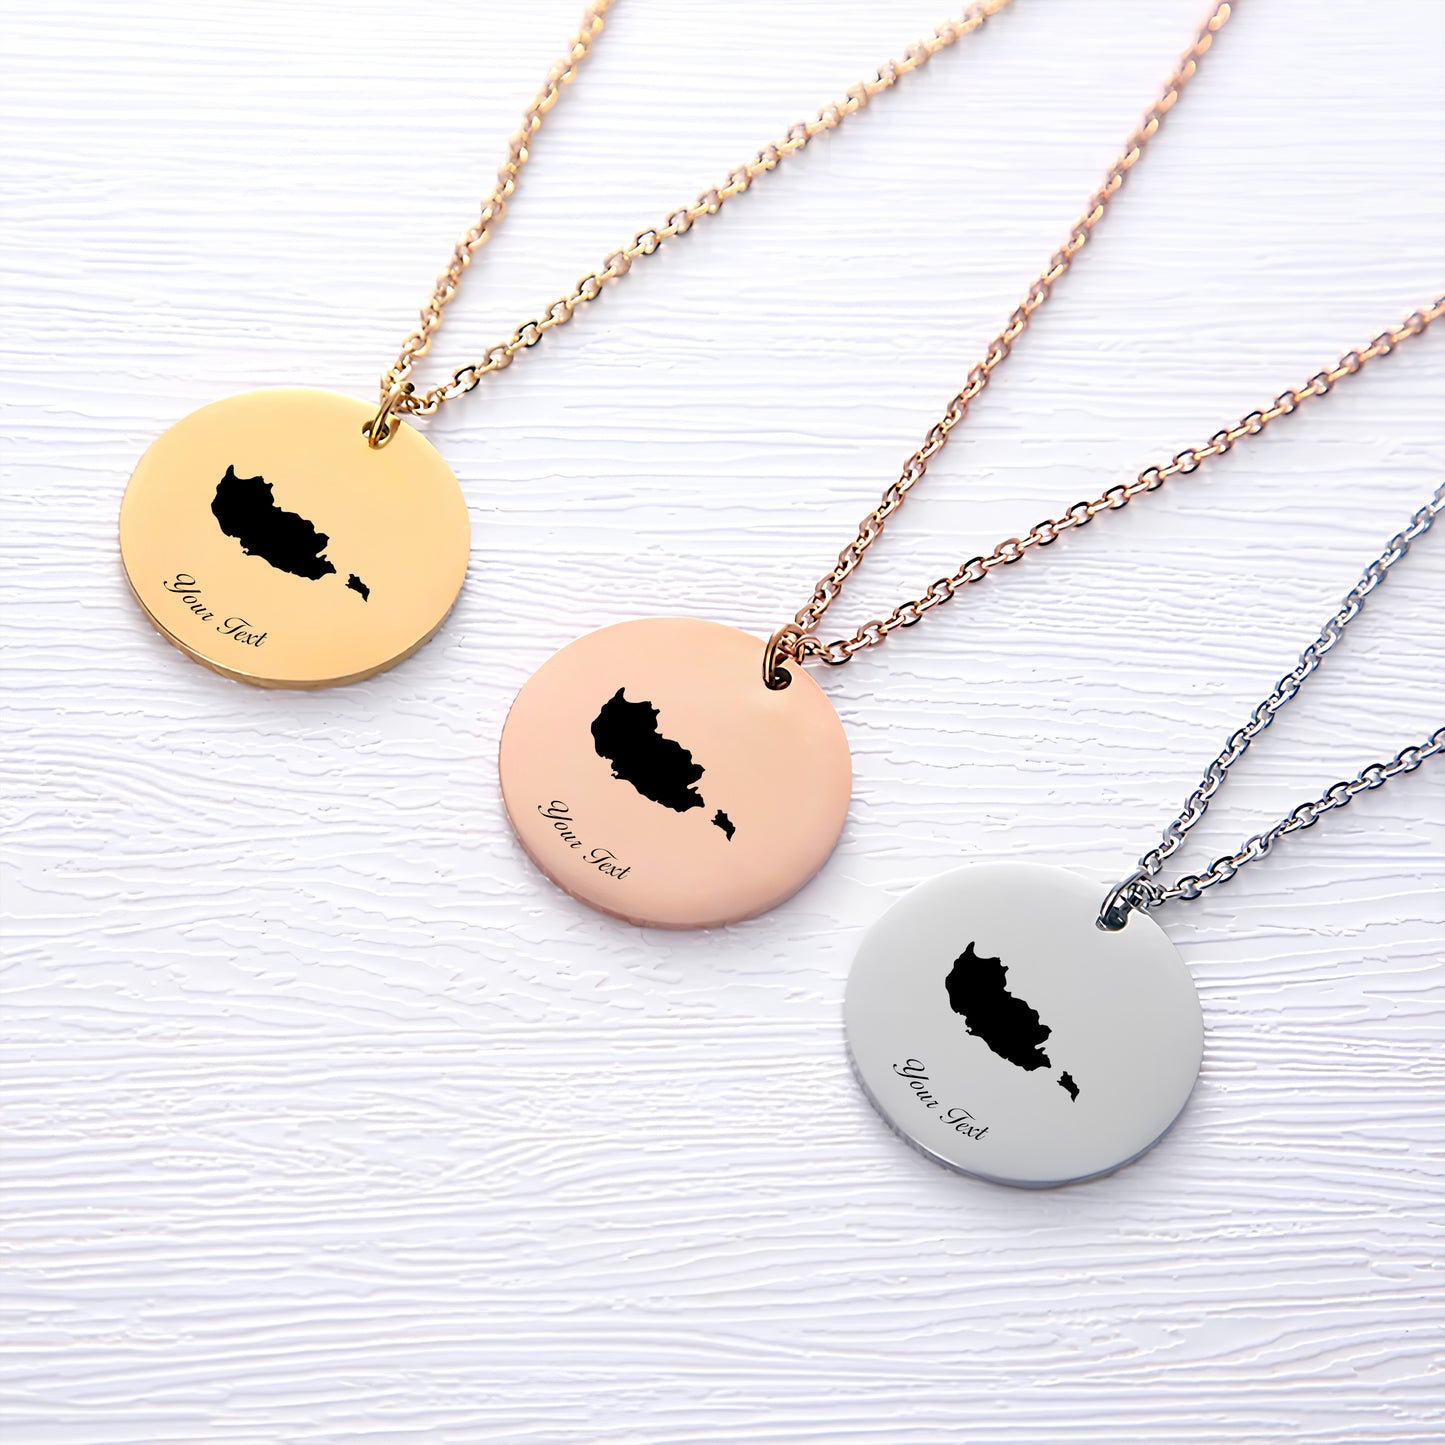 Cyprus Country Map Necklace - Personalizable Jewelry